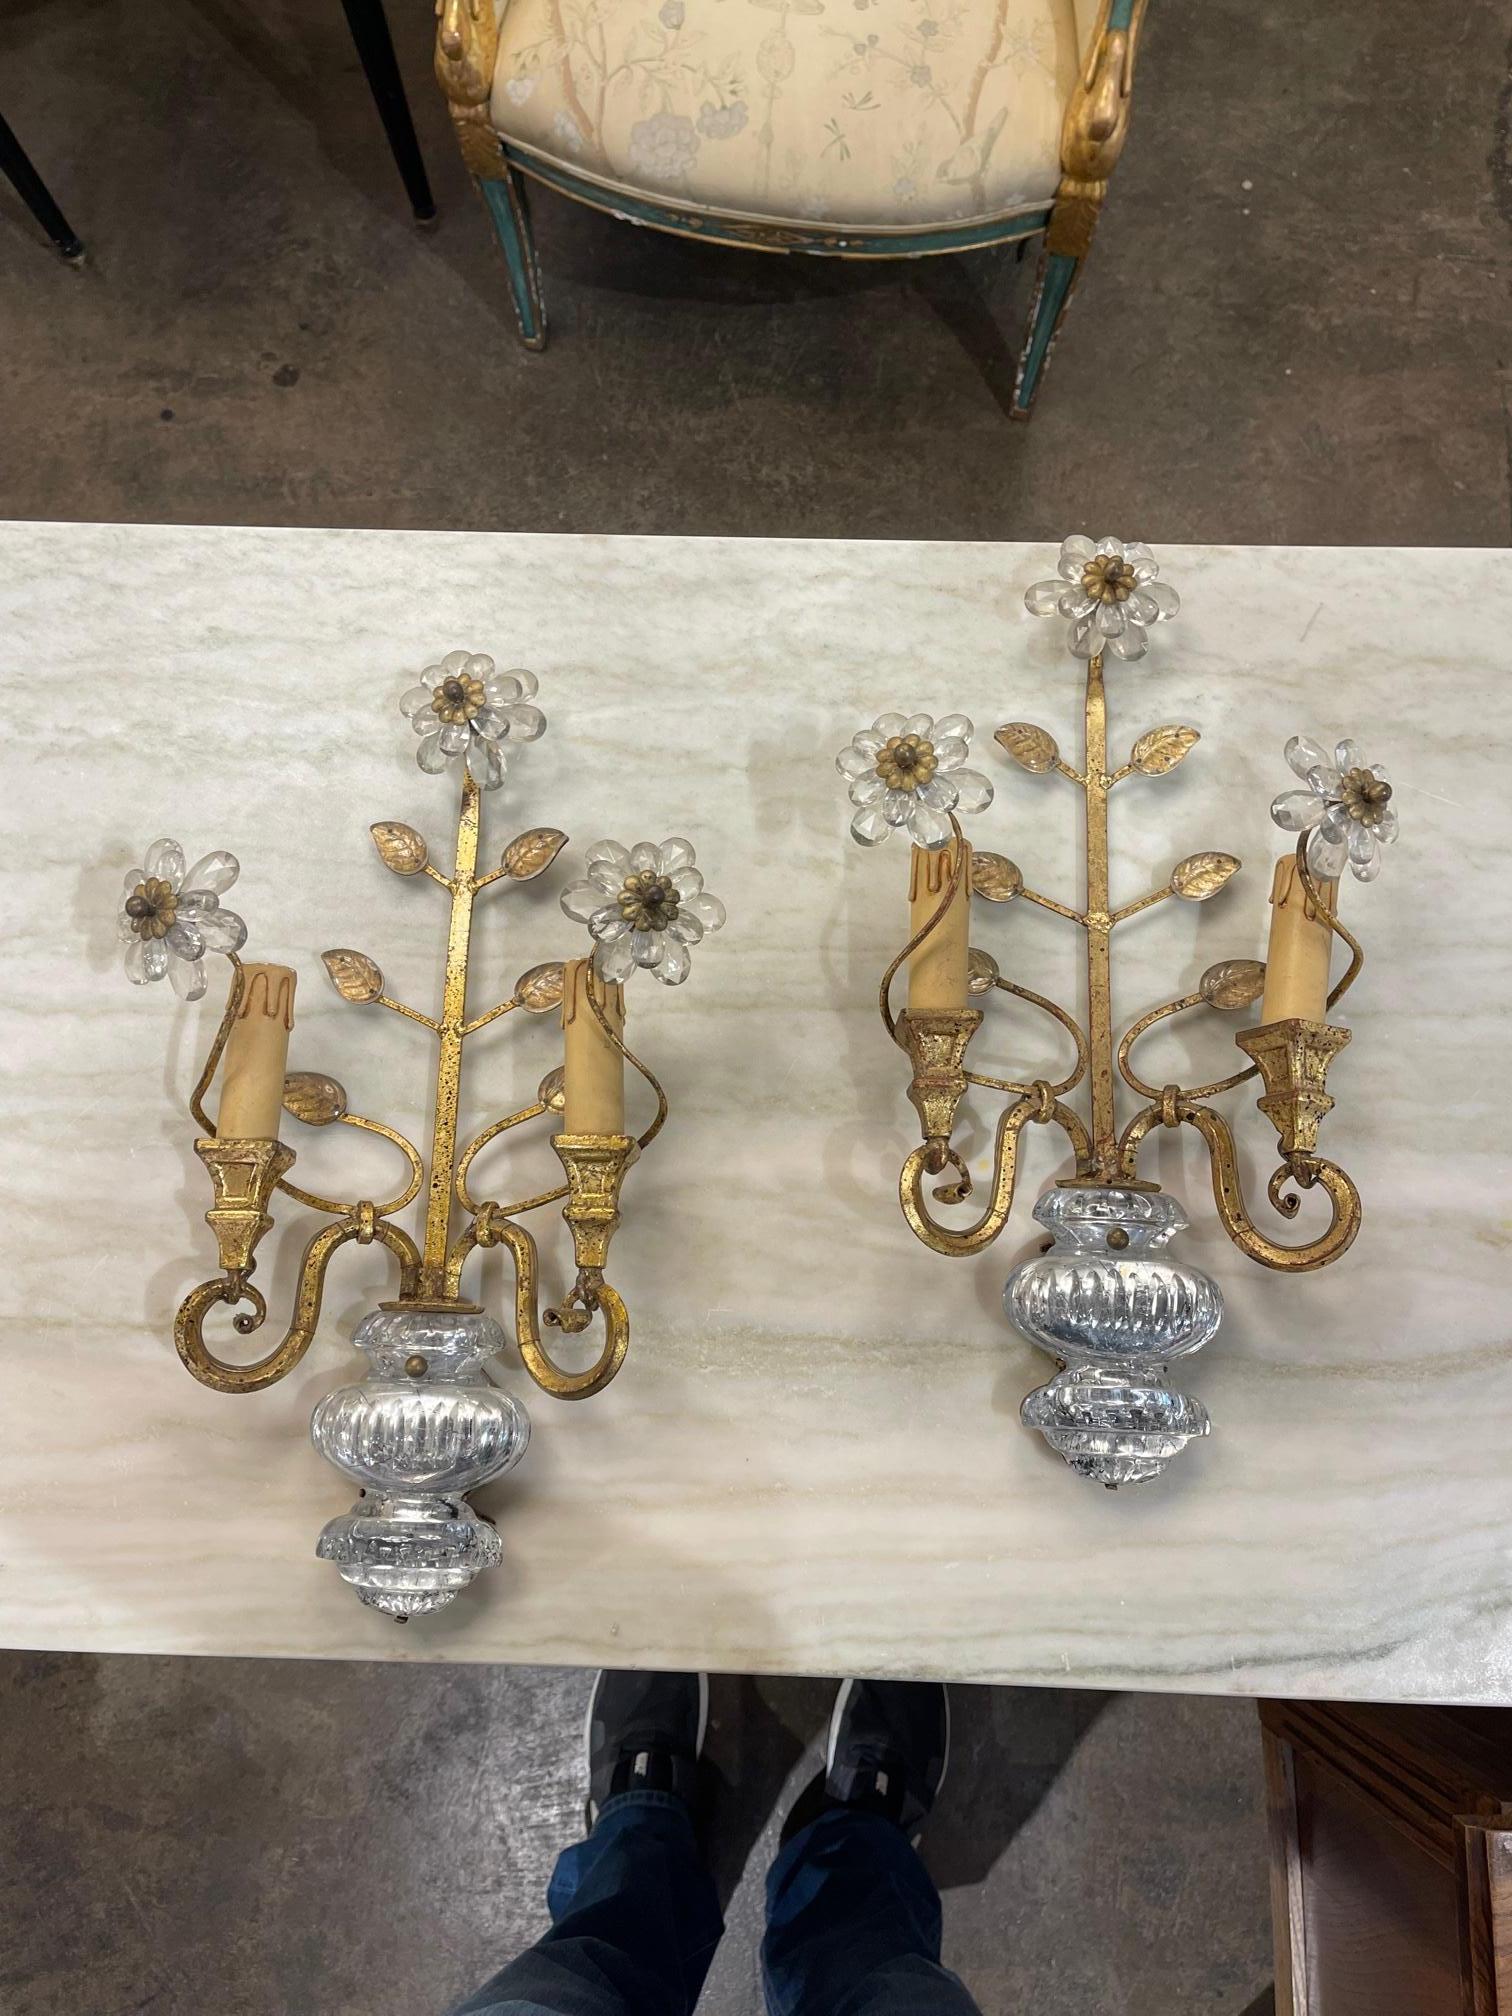 Pair of vintage Italian Bagues style gilt iron crystal flower sconces, Circa 1940. The sconces are wired and ready to hang. Sure to make a statement.